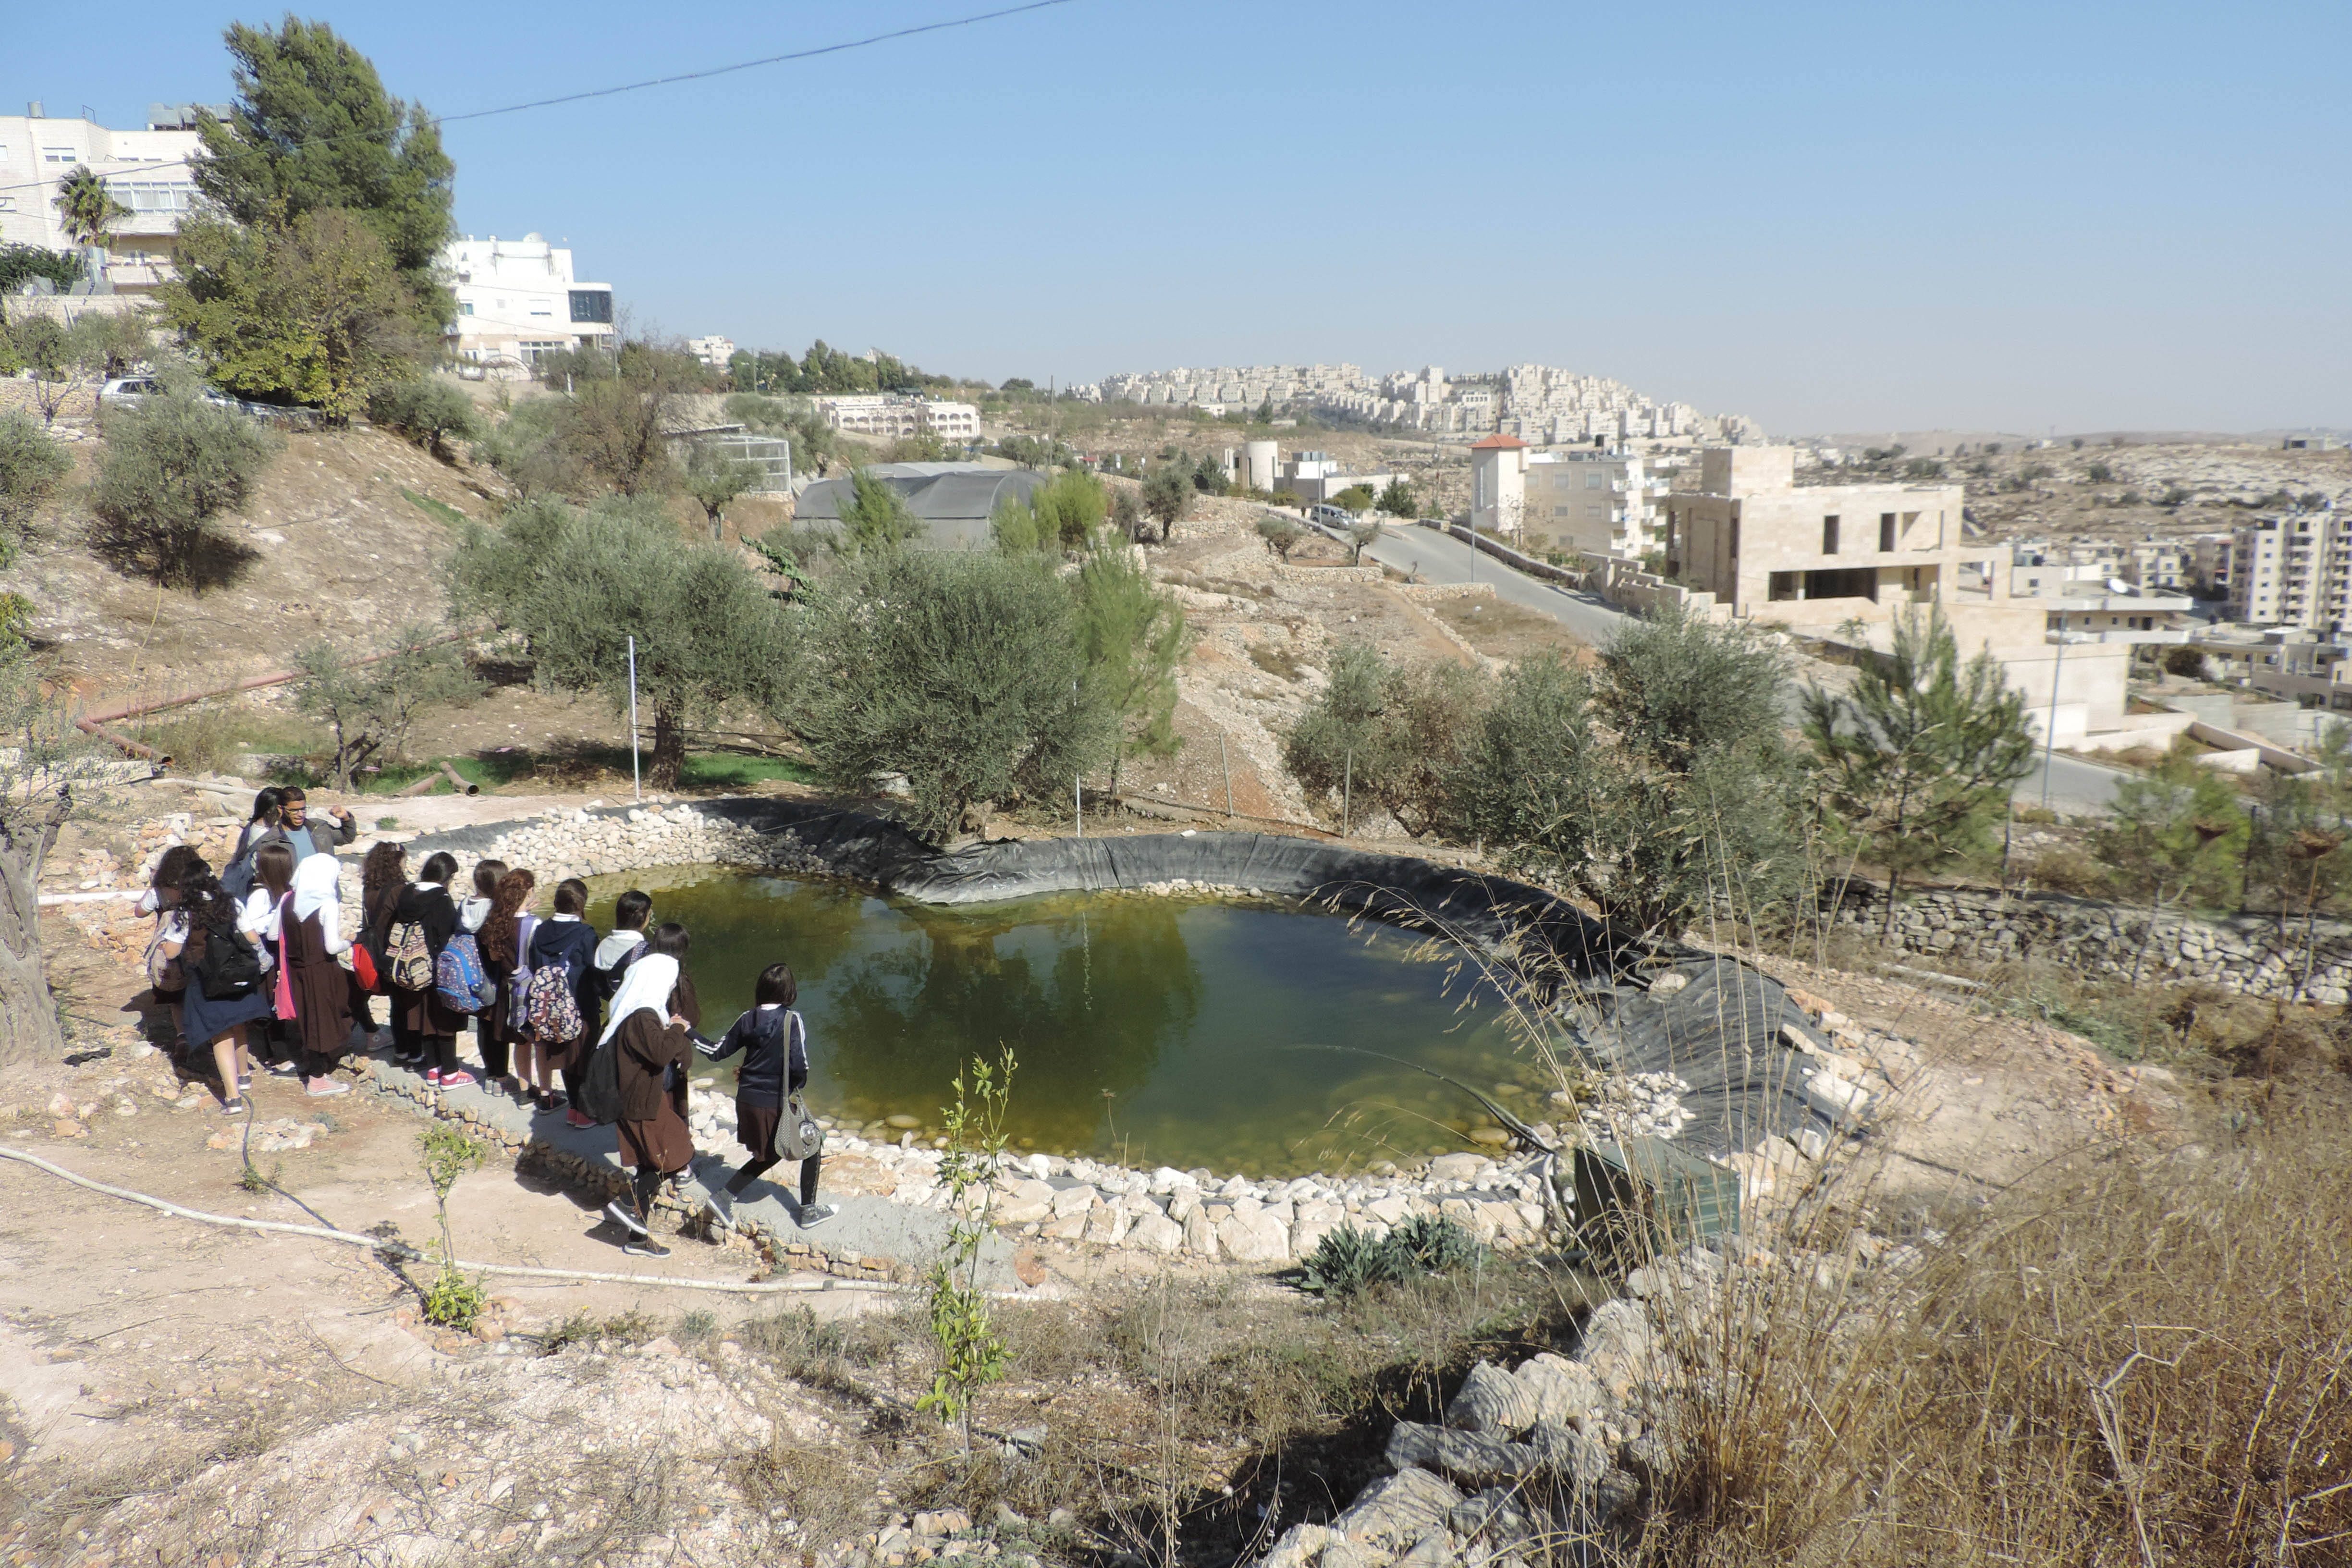 Schoolgirls visiting the museum stand by the pond in the garden overlooking the Israeli settlement of Har Homa (MEE/Miriam Deprez)